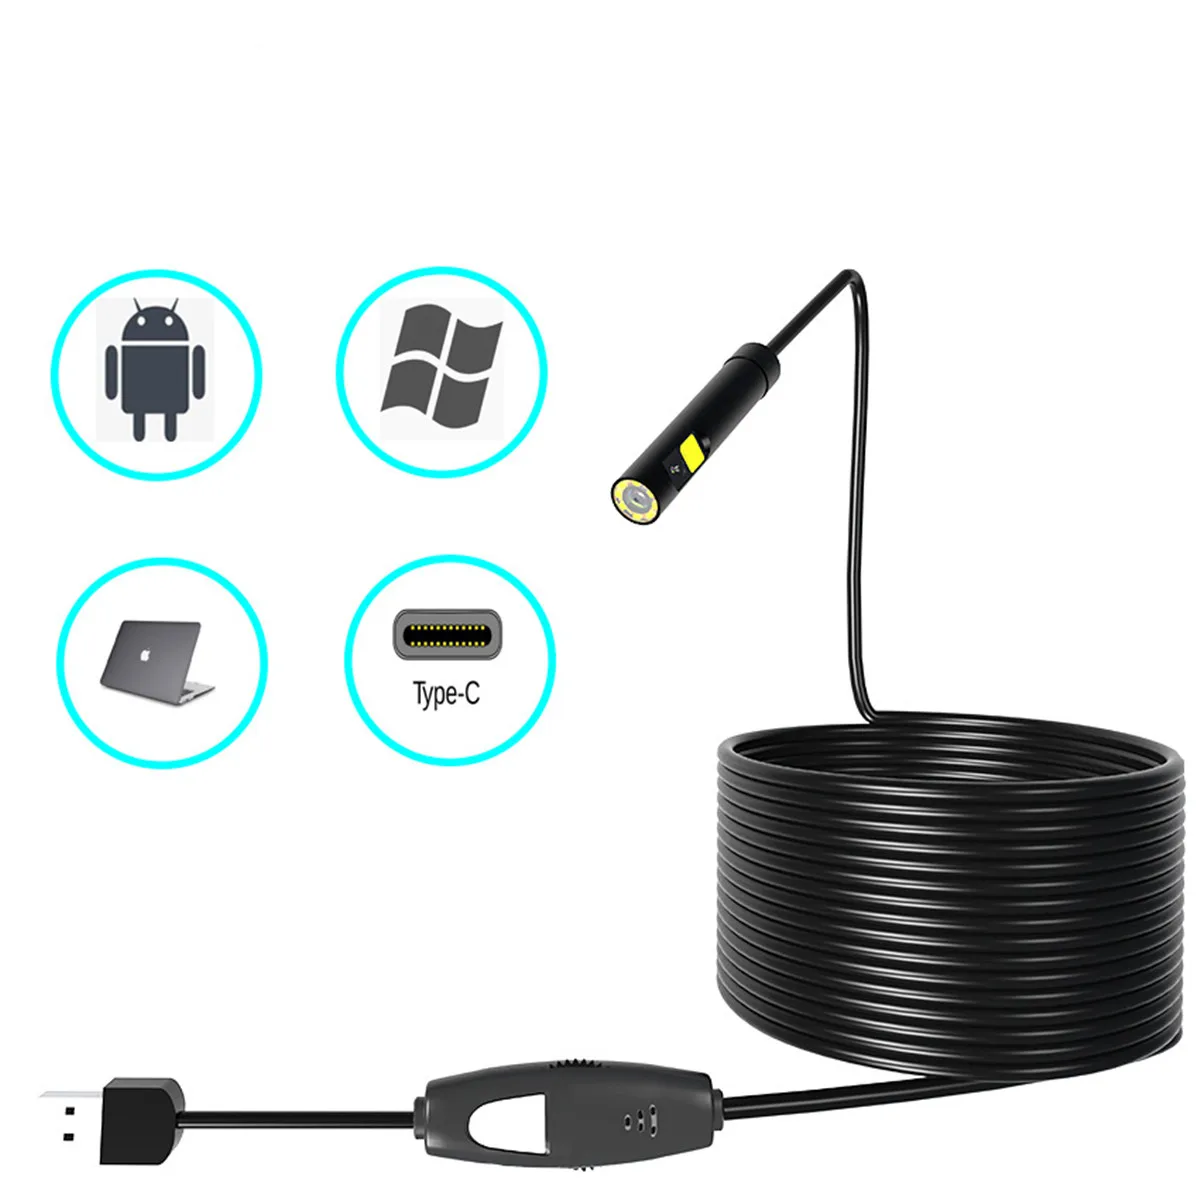 2MP 8MM 3in1 USB Dual Lens Endoscope Camera For Android&Computer CMOS Borescope Inspection  Digital Microscope Otoscope 2mp 8mm 3in1 usb dual lens endoscope camera for android